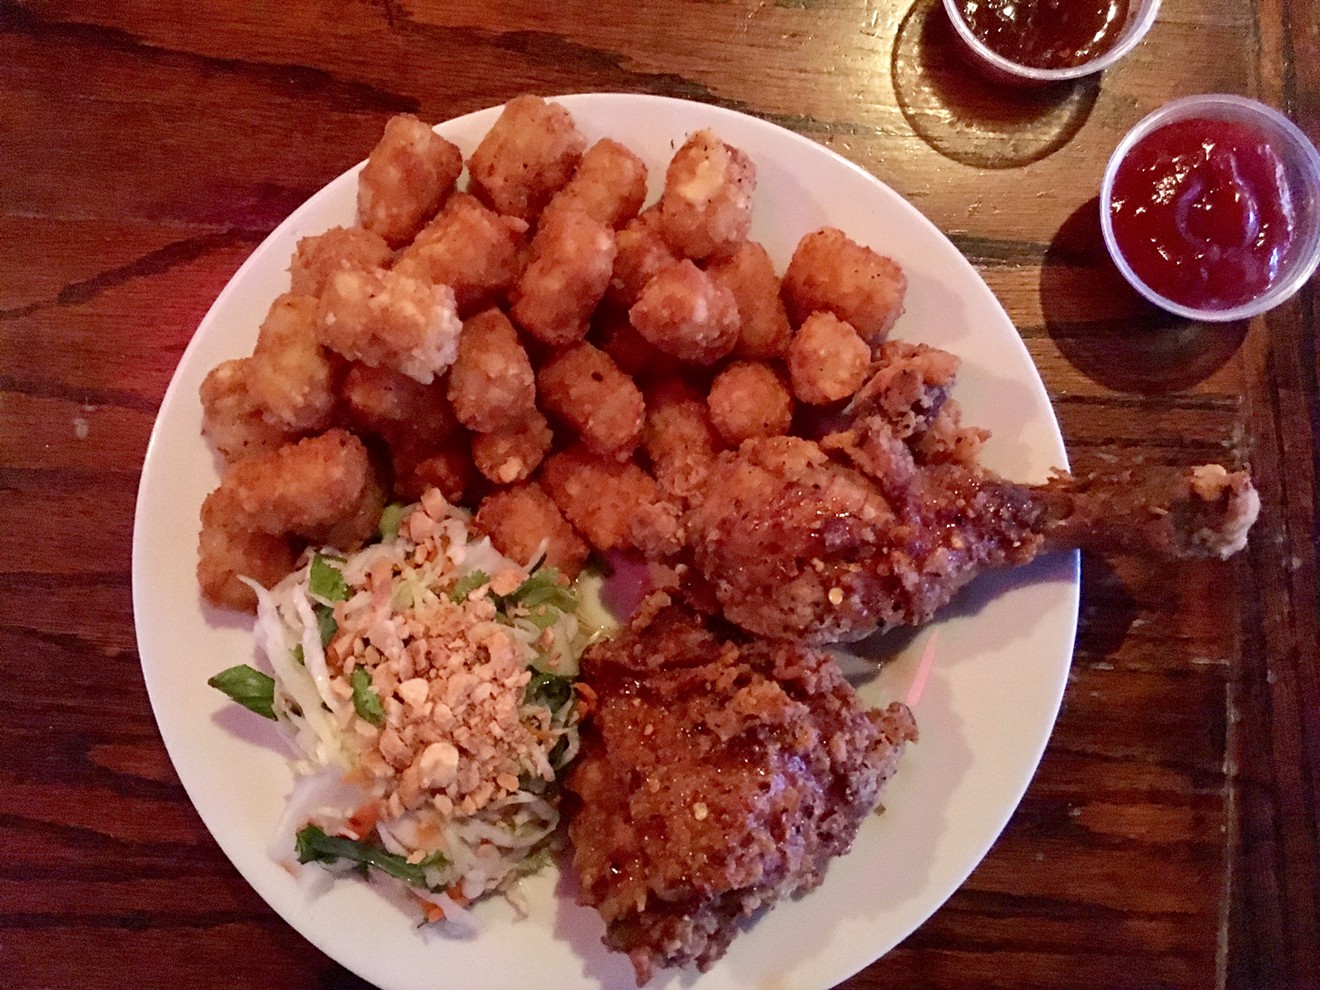 On Wednesdays, crunchy Vietnamese fried chicken and cole slaw with fish sauce are the star at Cosmo's for $12.